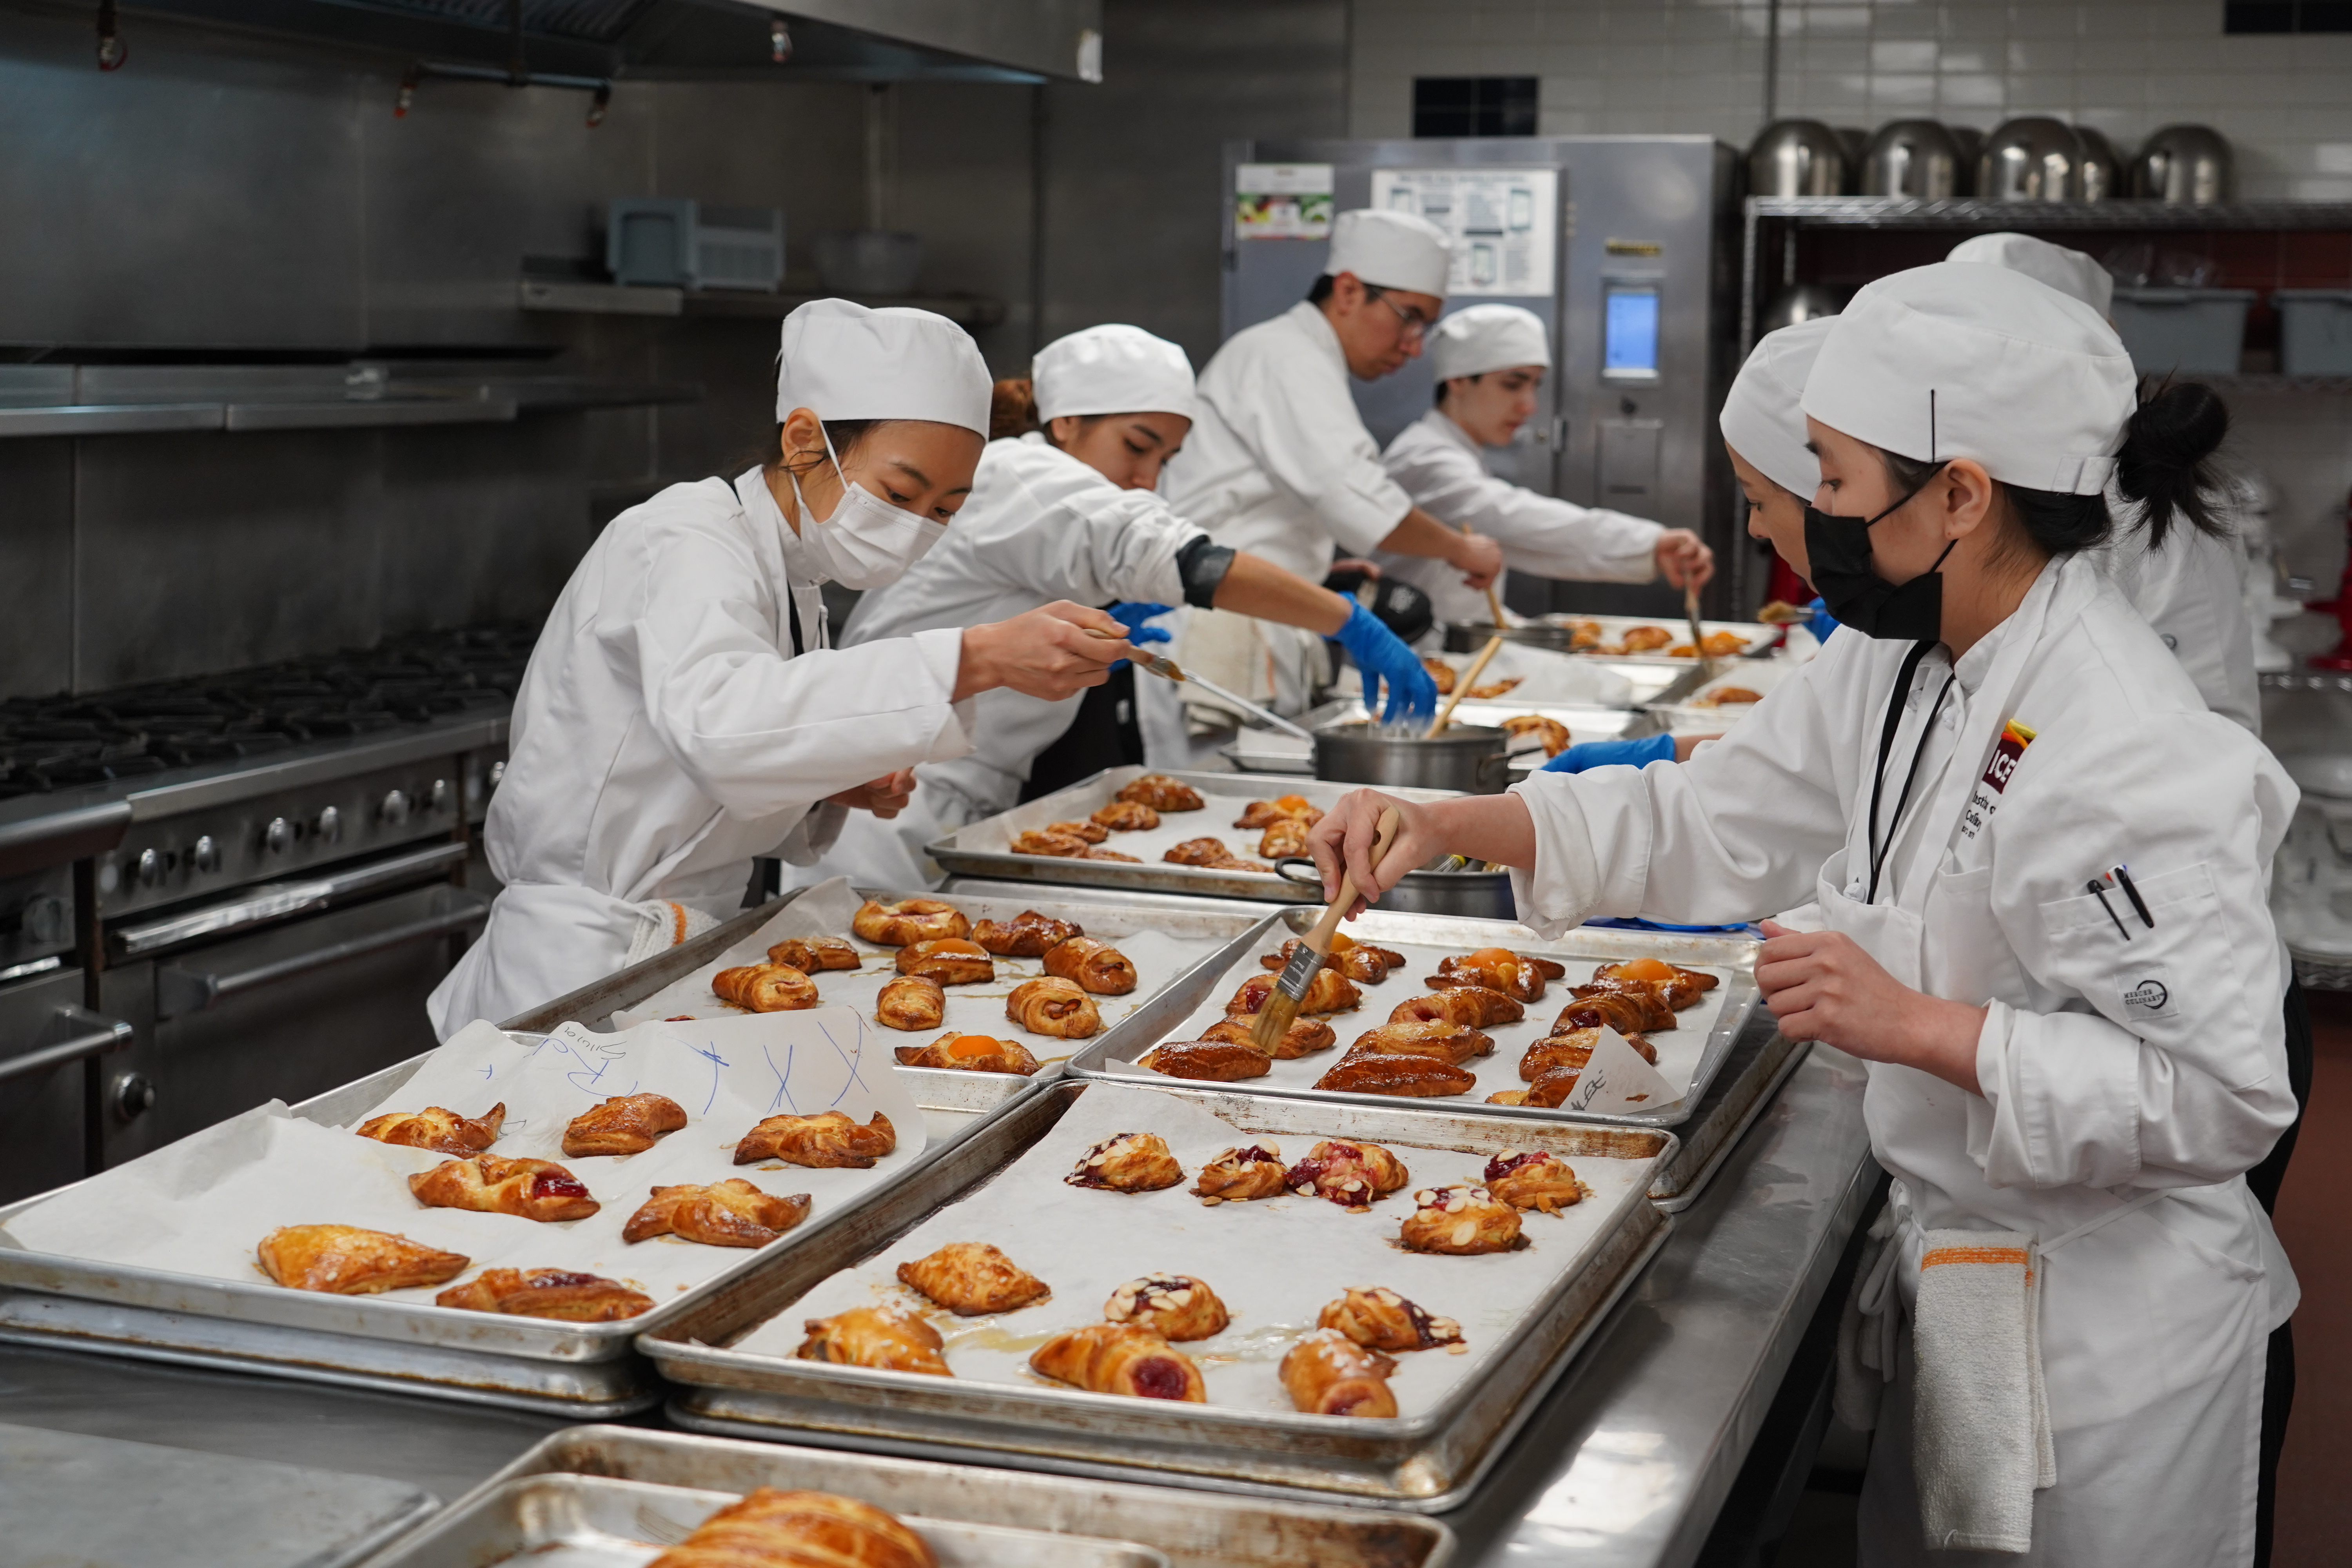 ICE Pastry & Baking students in white coats work together to glaze sheets of pastries